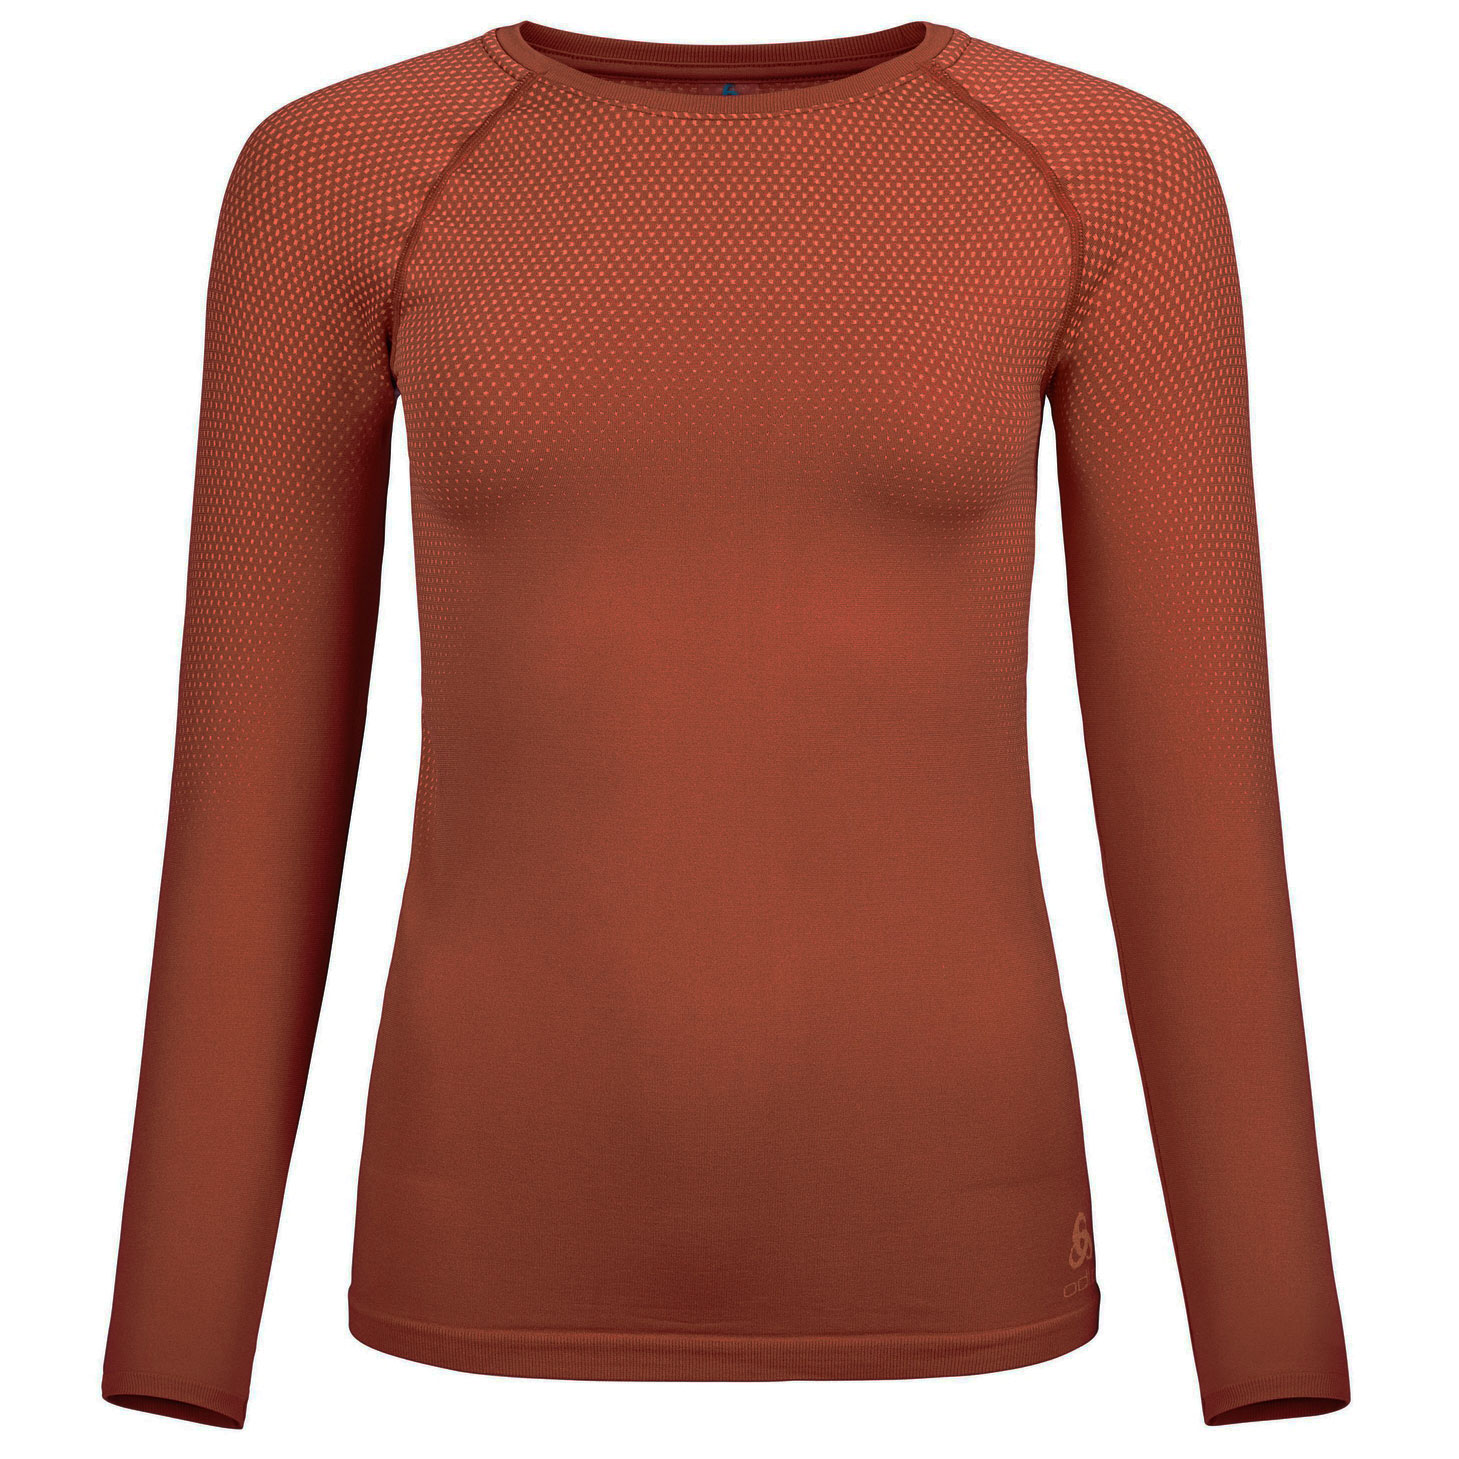 Picture of Odlo Performance Light Long-Sleeve Base Layer Top Women - spiced apple